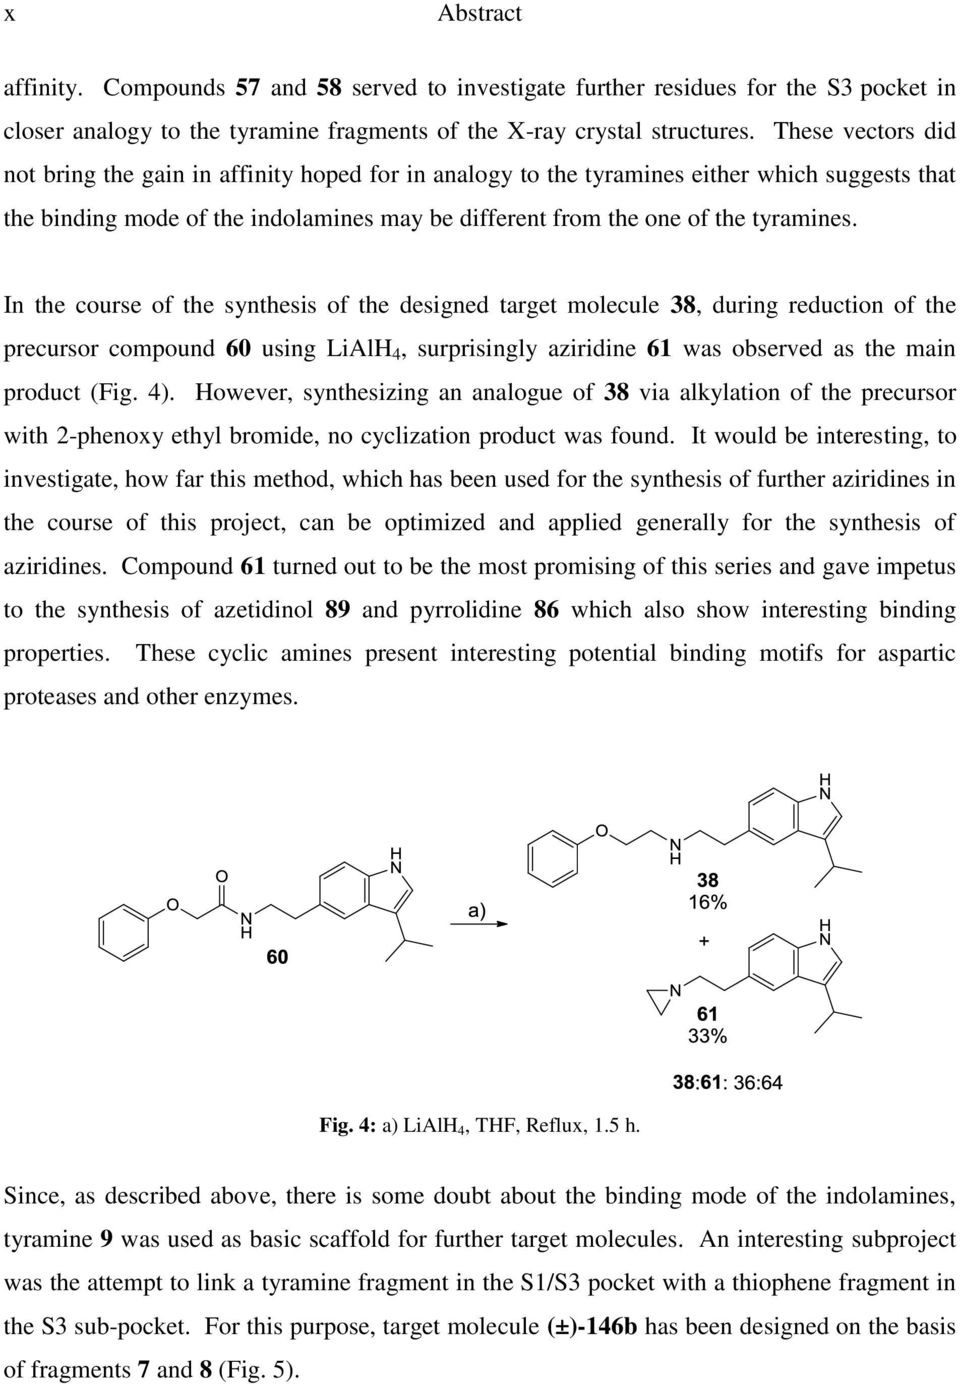 In the course of the synthesis of the designed target molecule 38, during reduction of the precursor compound 60 using LiAlH 4, surprisingly aziridine 61 was observed as the main product (Fig. 4).